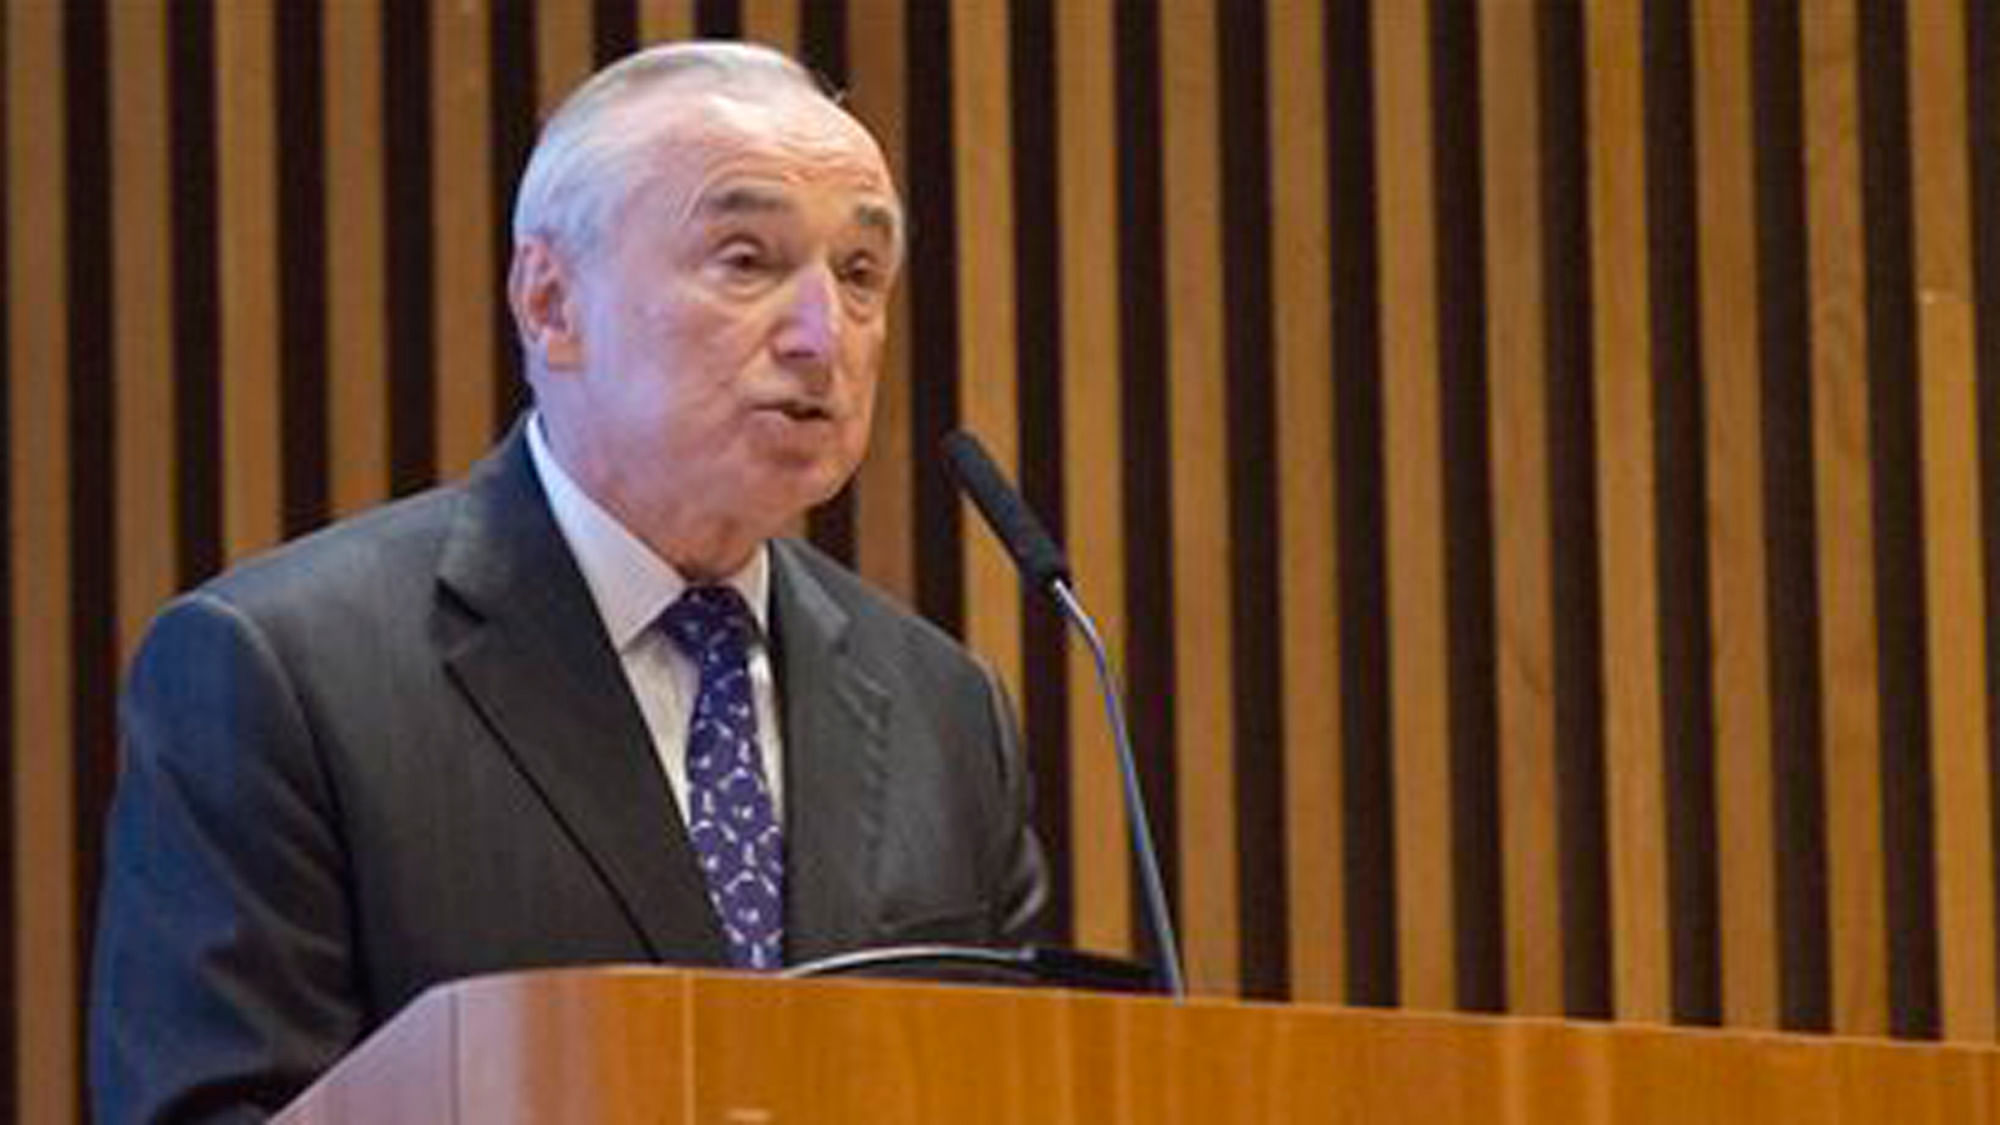 NYPD Commissioner William Bratton address the NYPD Shield Conference at police headquarters, Wednesday, Dec. 16, 2015, in New York. (Photo: AP)